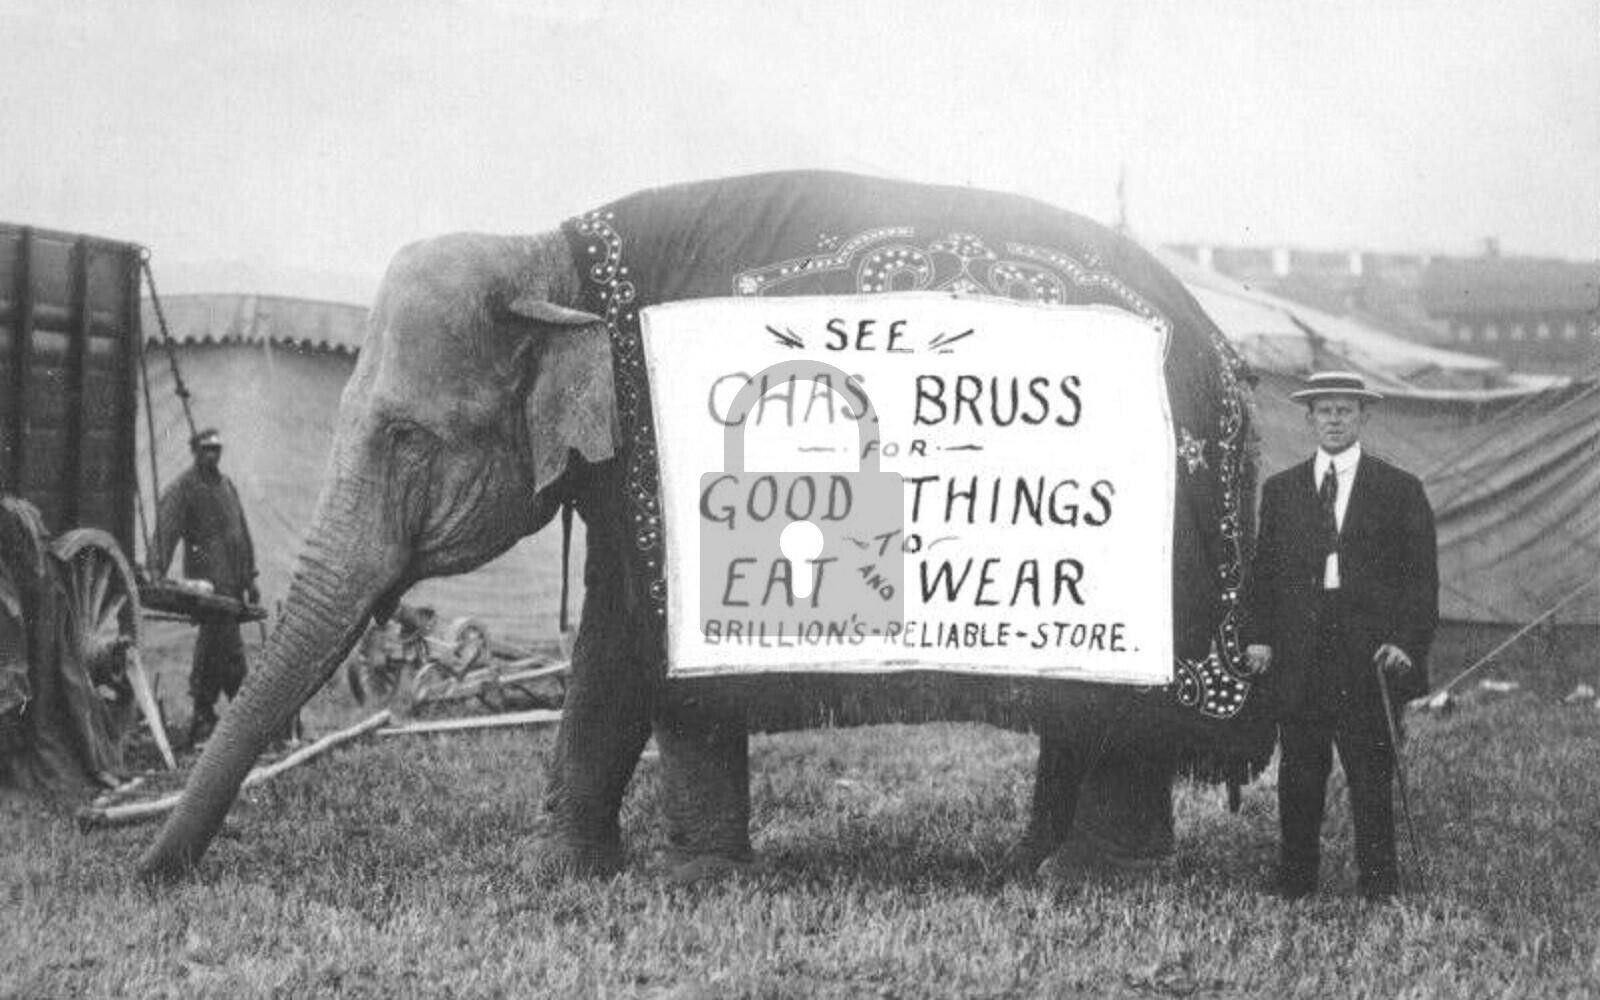 Chas Bruss Store Elephant Ad Brillion Wisconsin WI - 8x10 Reprint